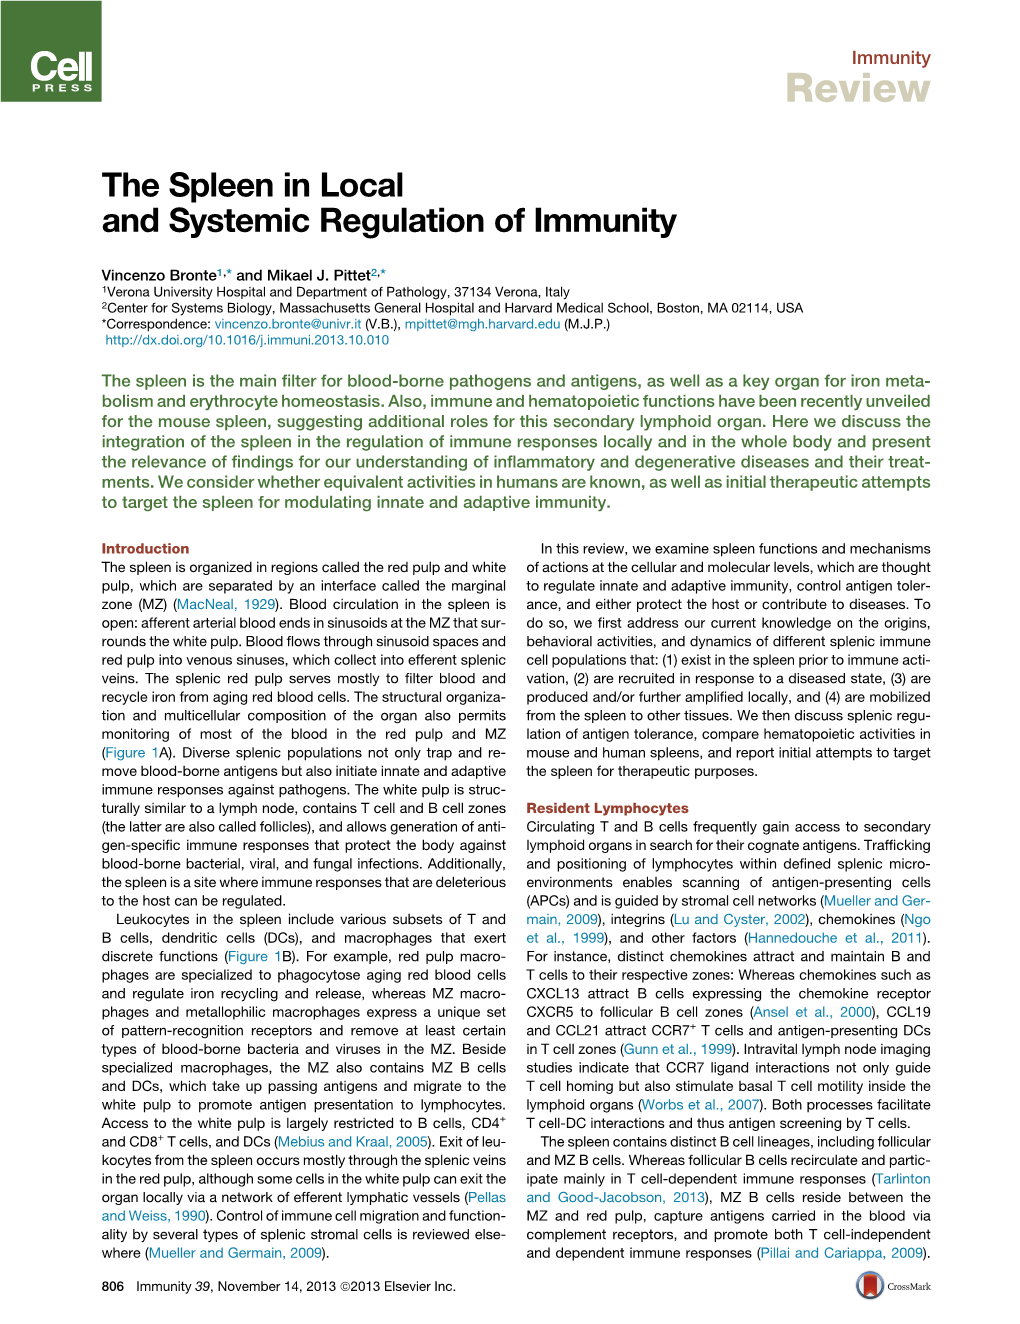 The Spleen in Local and Systemic Regulation of Immunity